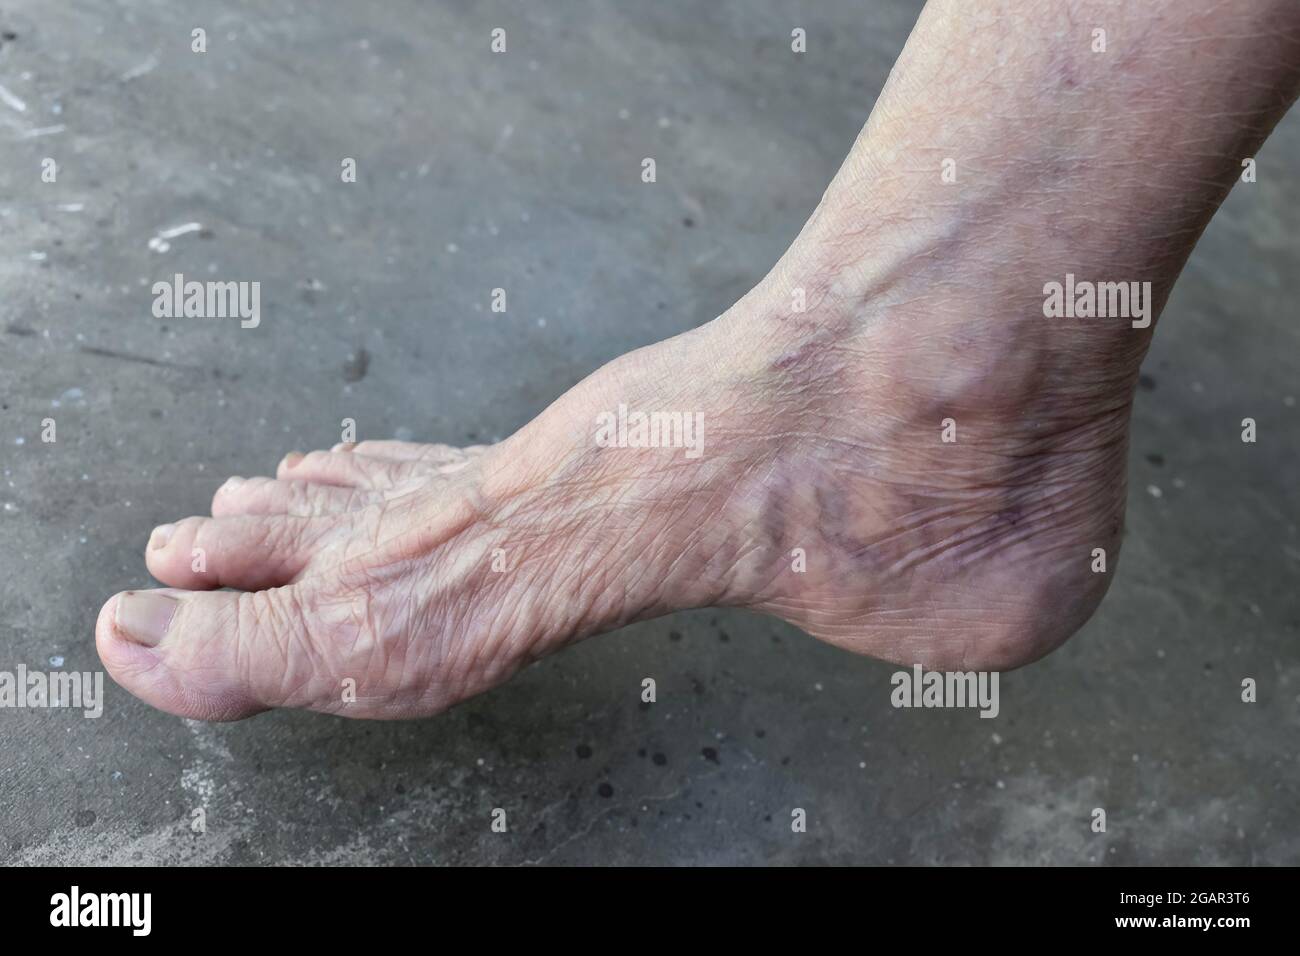 Southeast Asian, Myanmar old woman’s foot of lateral view. Skin creases, loosen skin and veins show aging. Isolated on cement background. Stock Photo